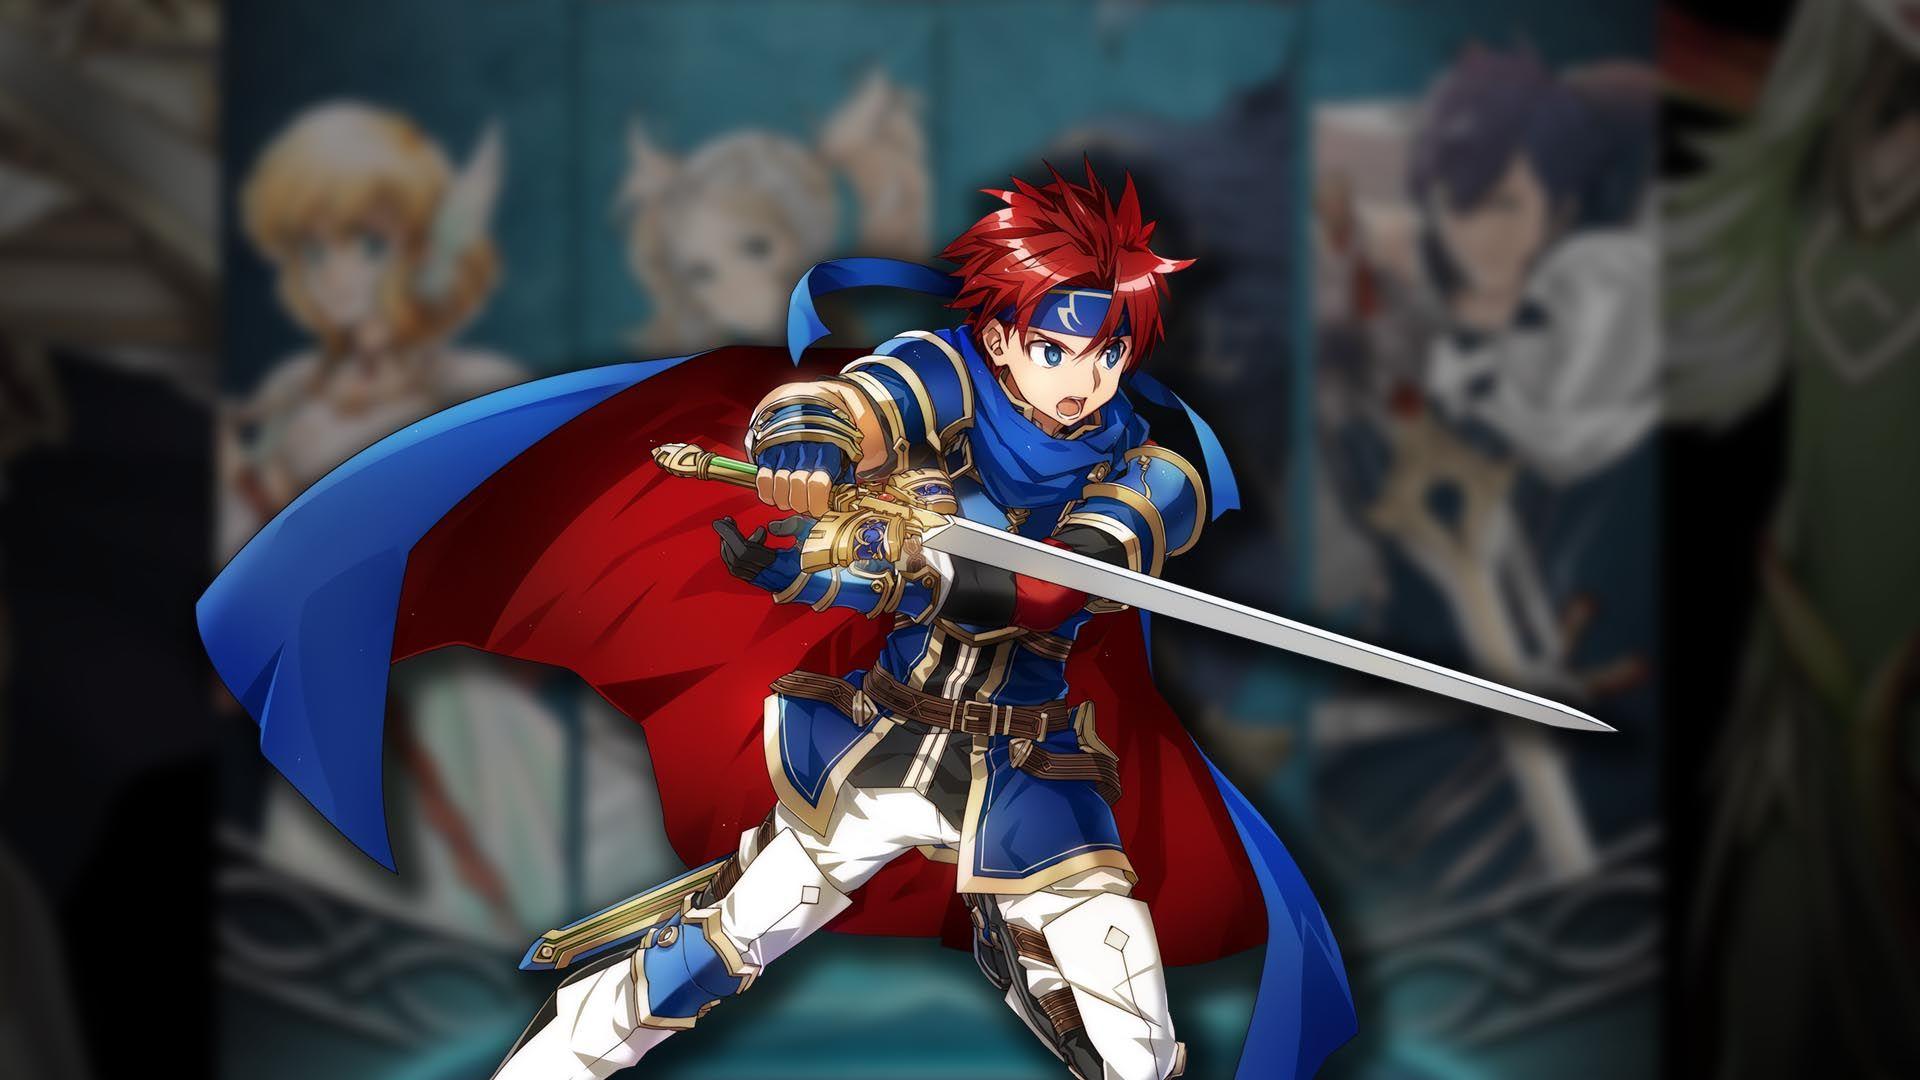 Fire Emblem Heroes “Choose Your Legends” results: Ike and Lyn come